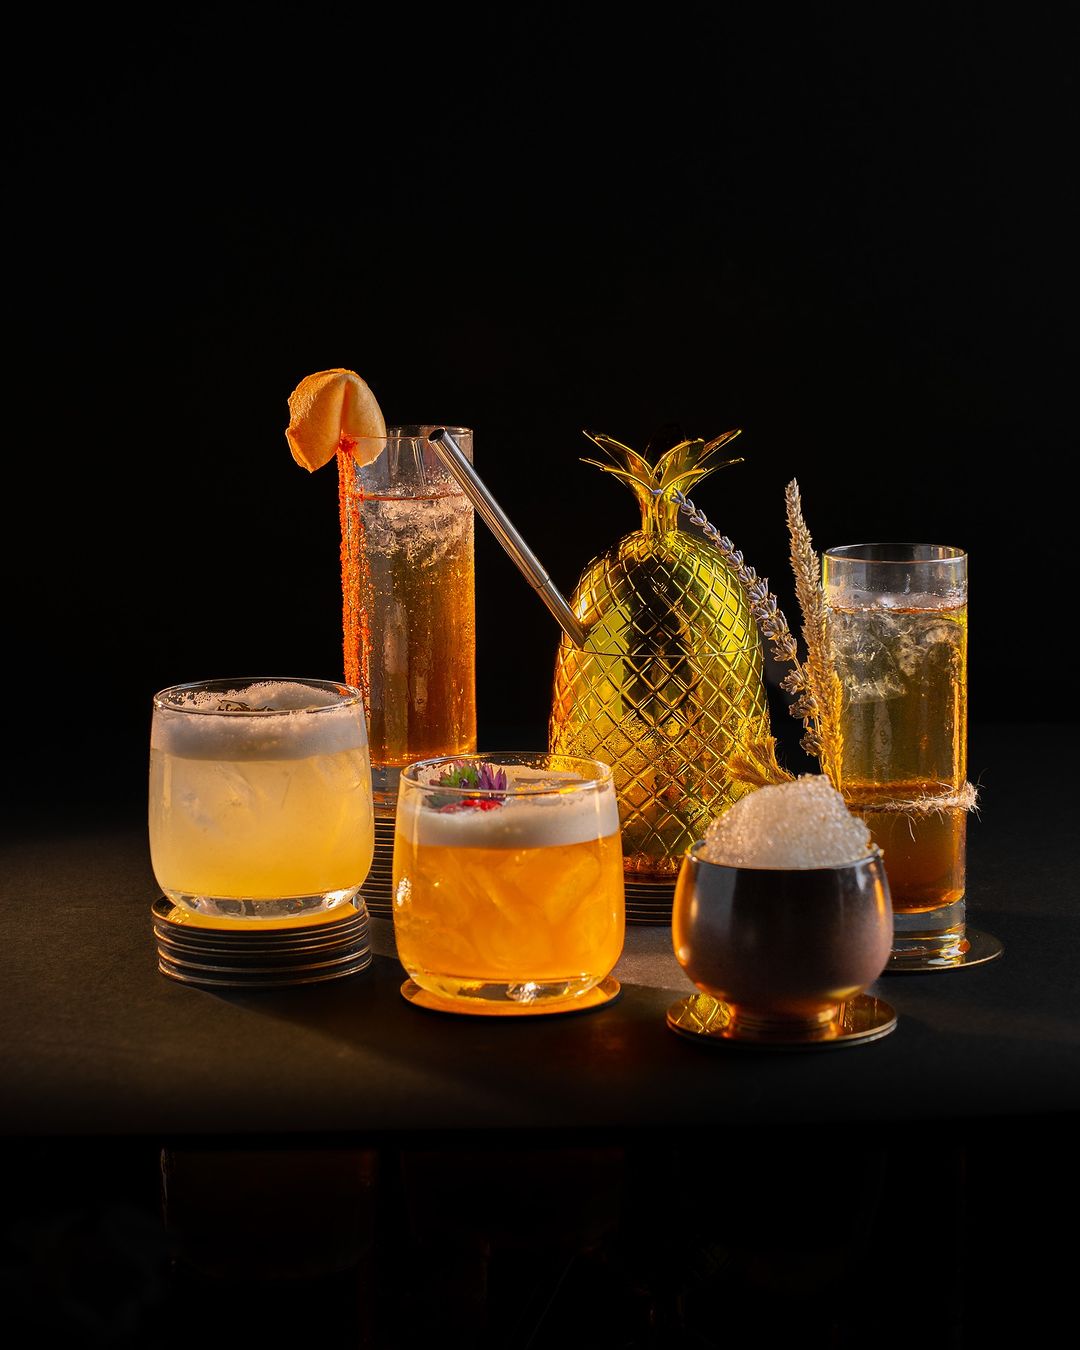 Toast to the holidays and a new year with Chairman FU's signature cocktails